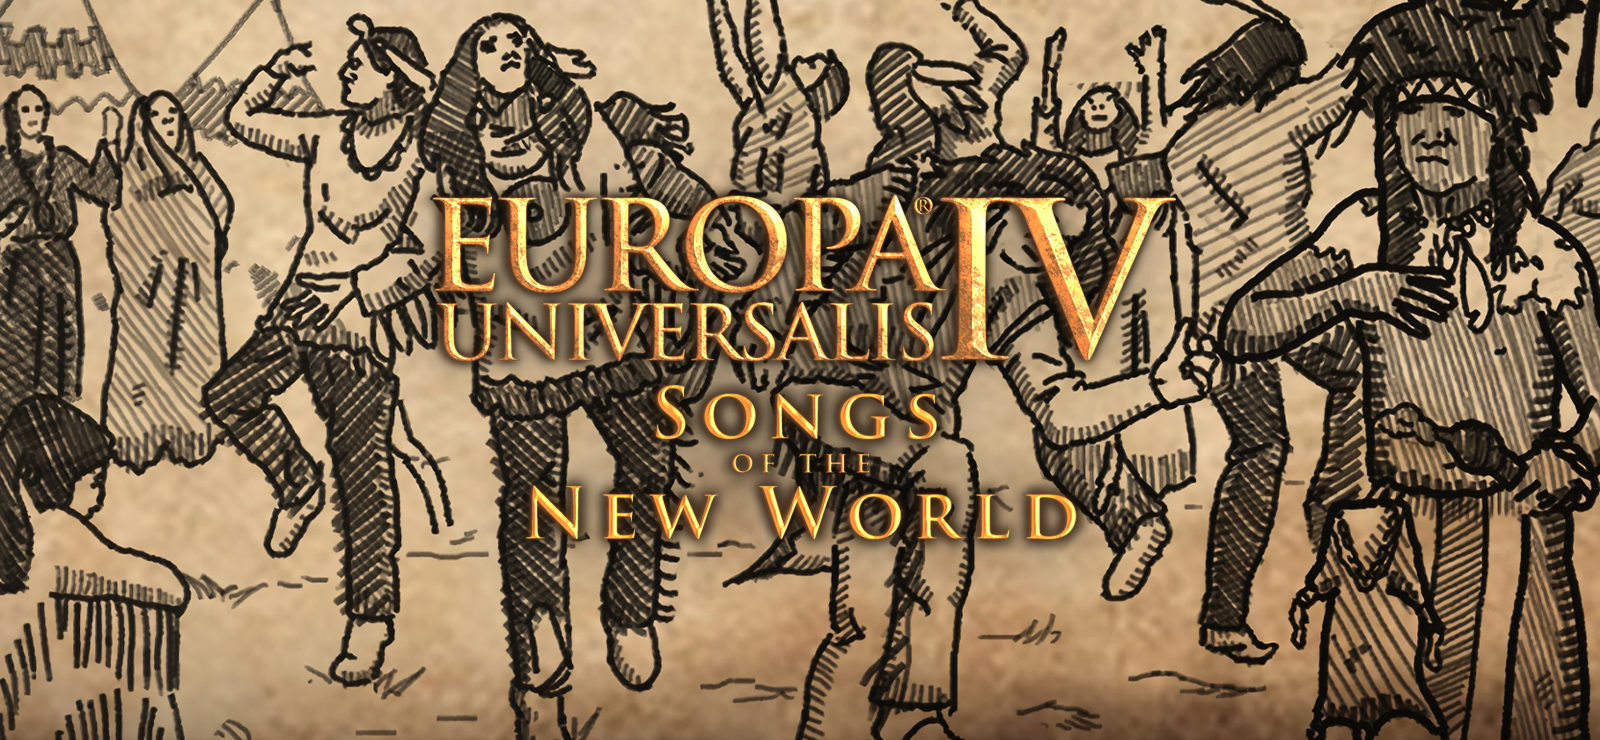 Europa Universalis IV: Songs Of The New World